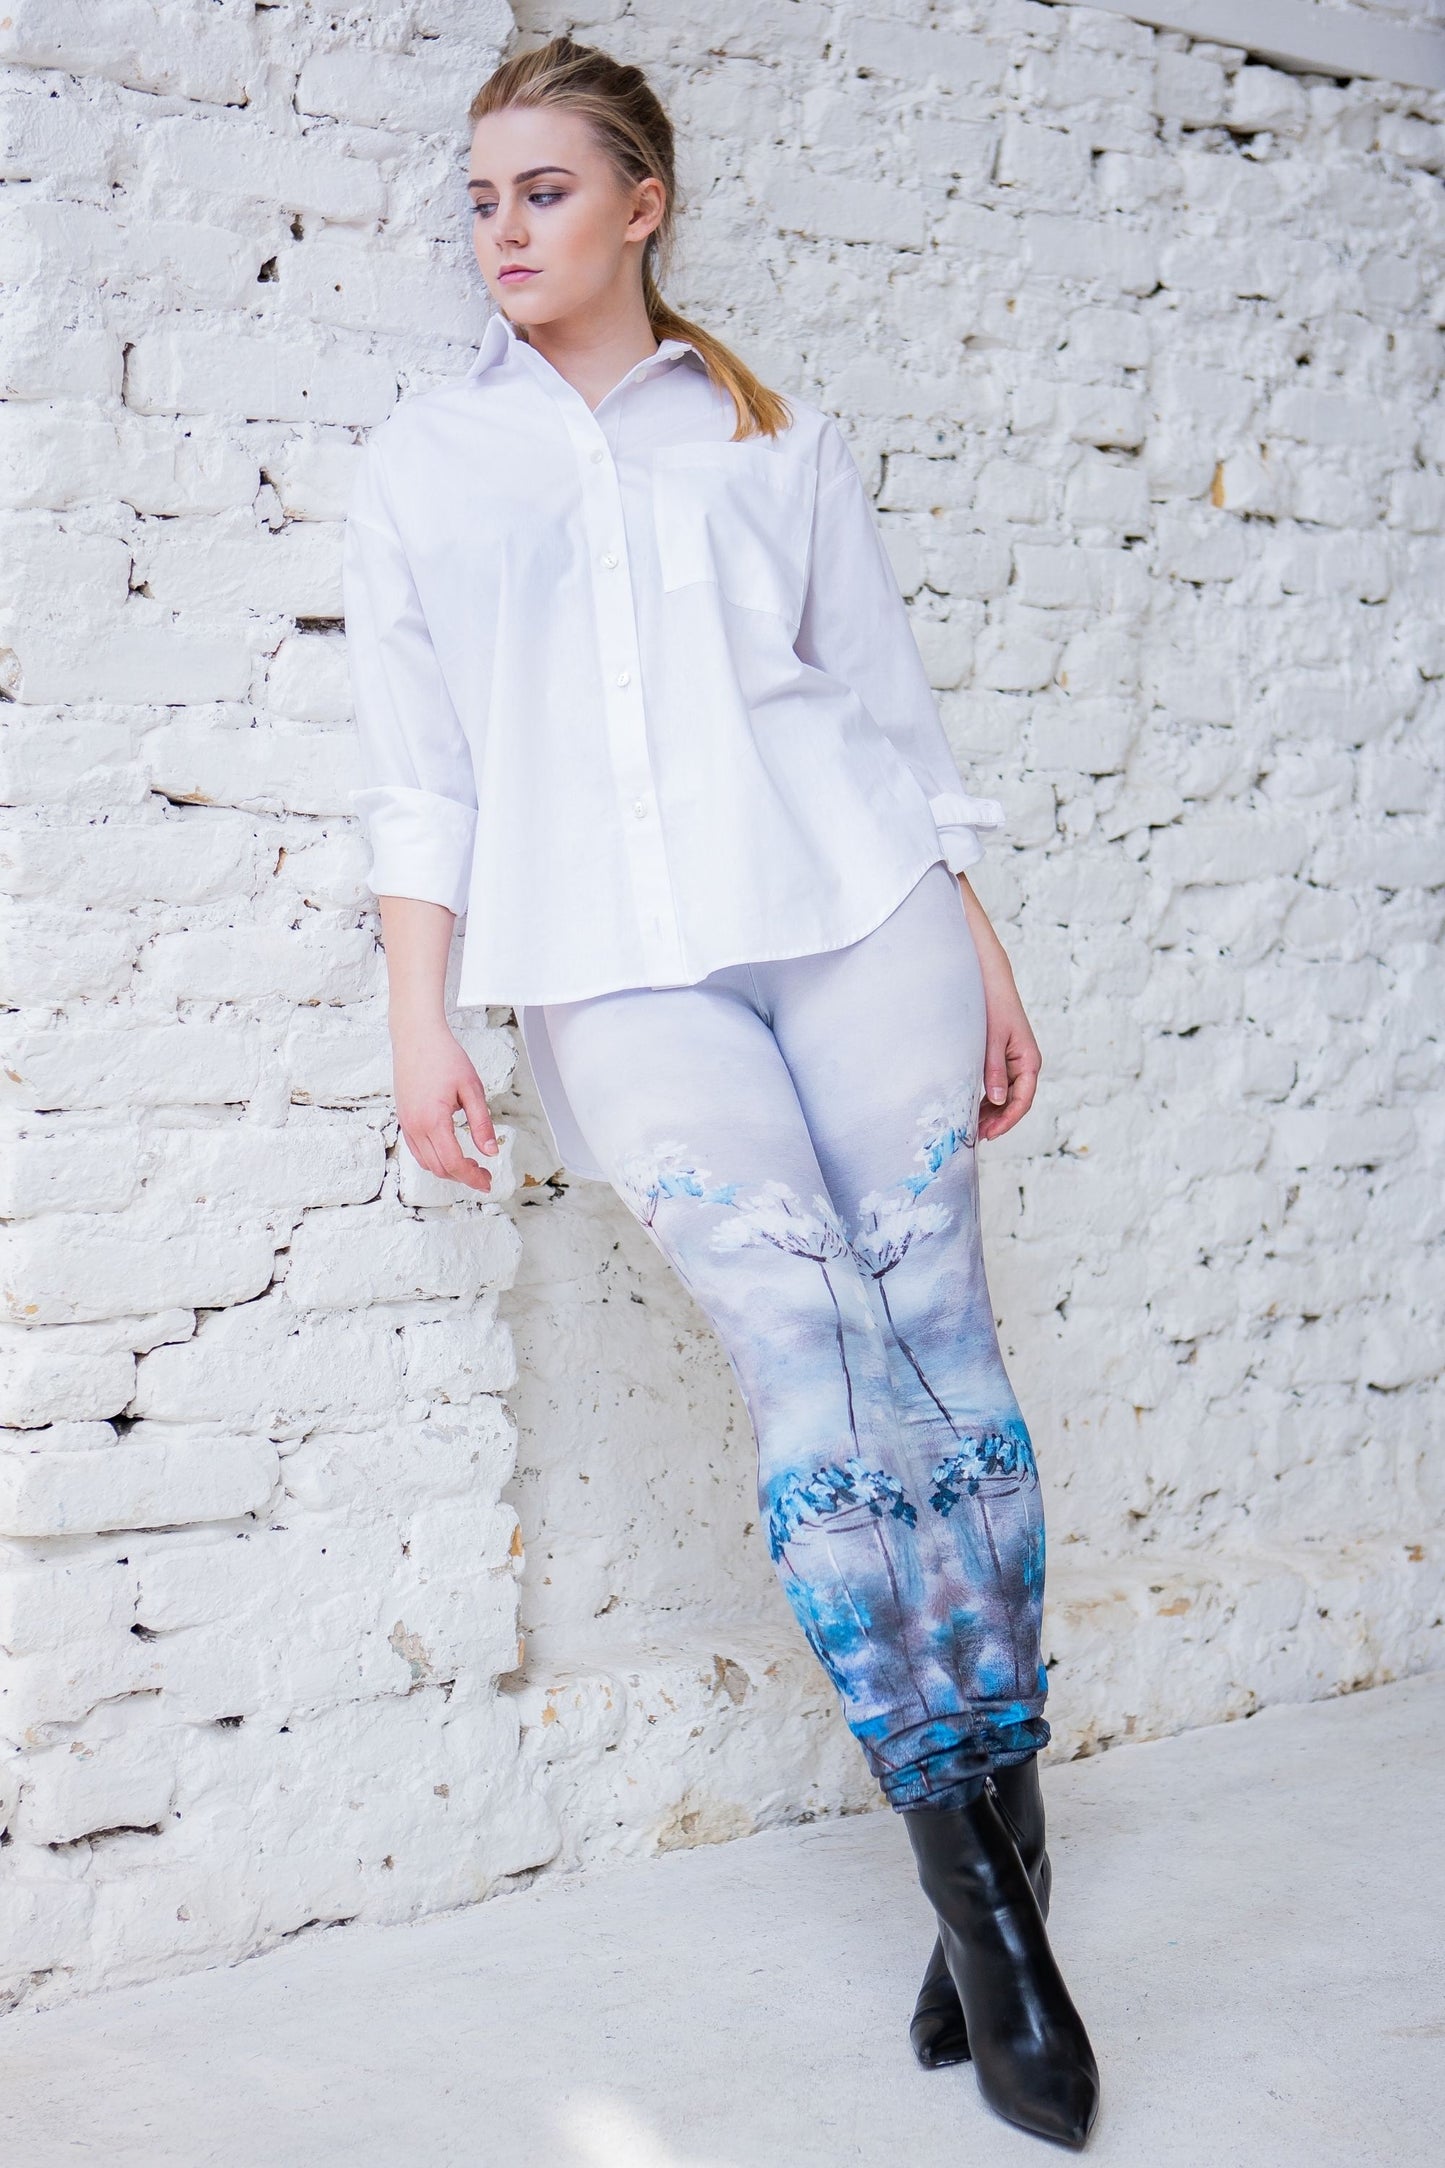 Leggings with painted blue floral print